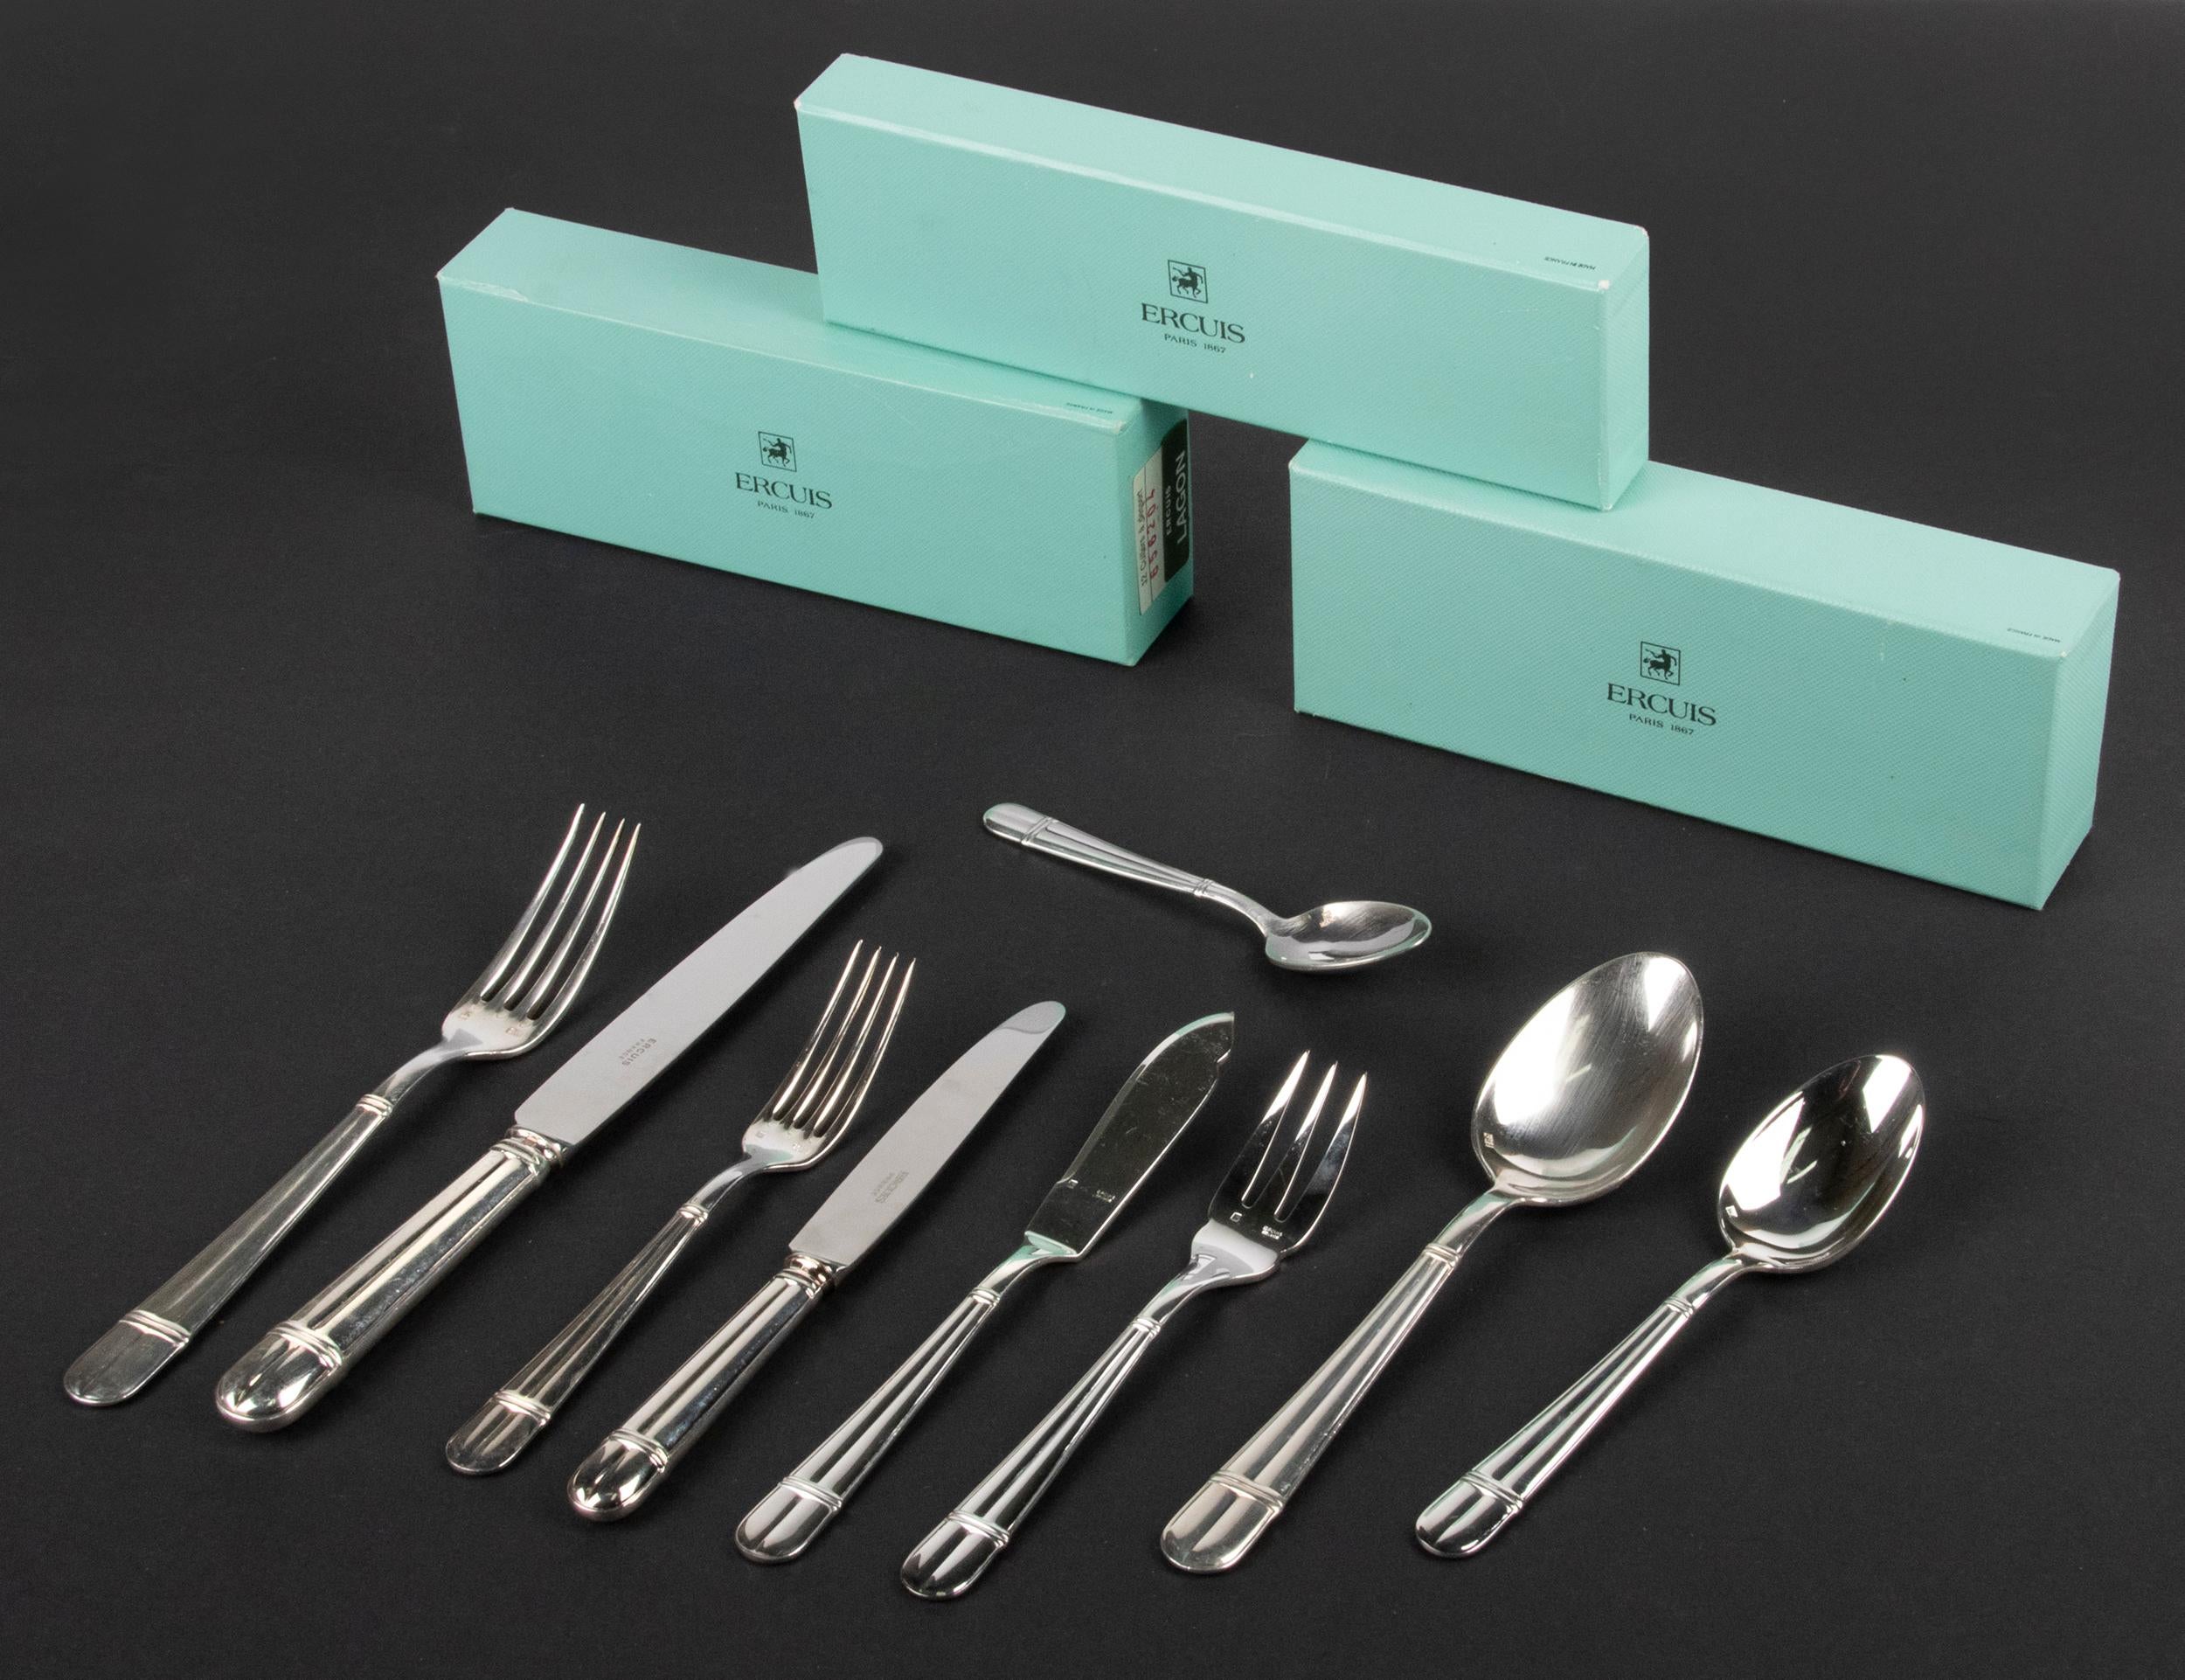 106-Piece Set of Silver Plated Cutlery from Ercuis, France 3